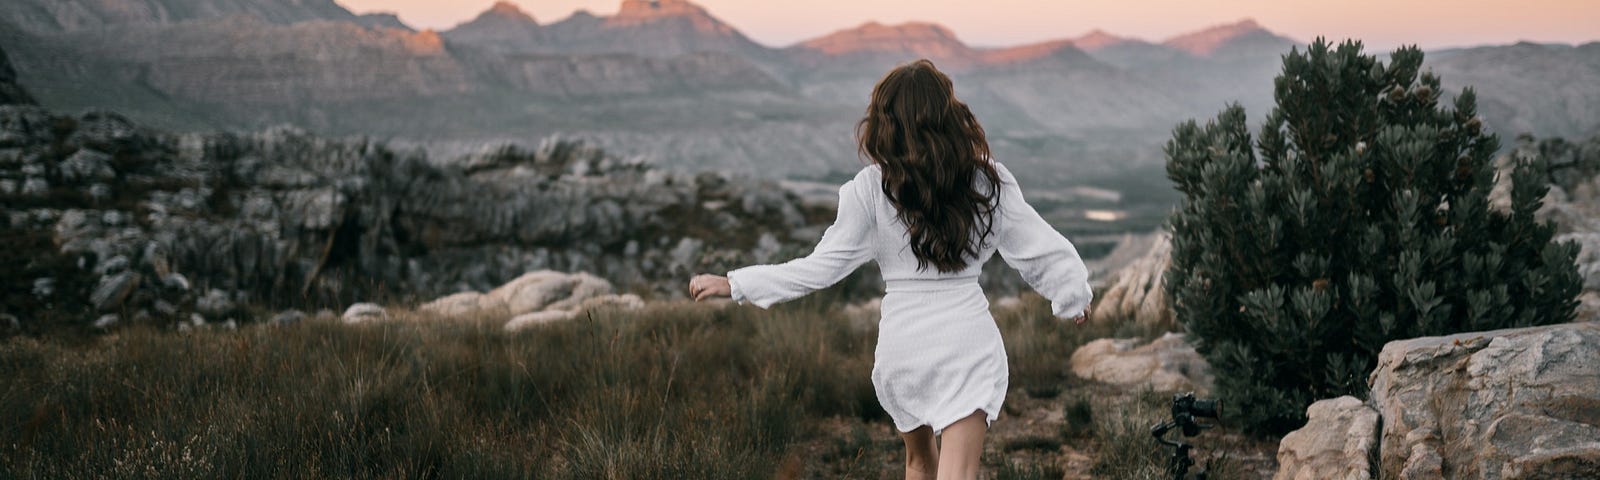 Woman with long sleeve dress running on mountainous track